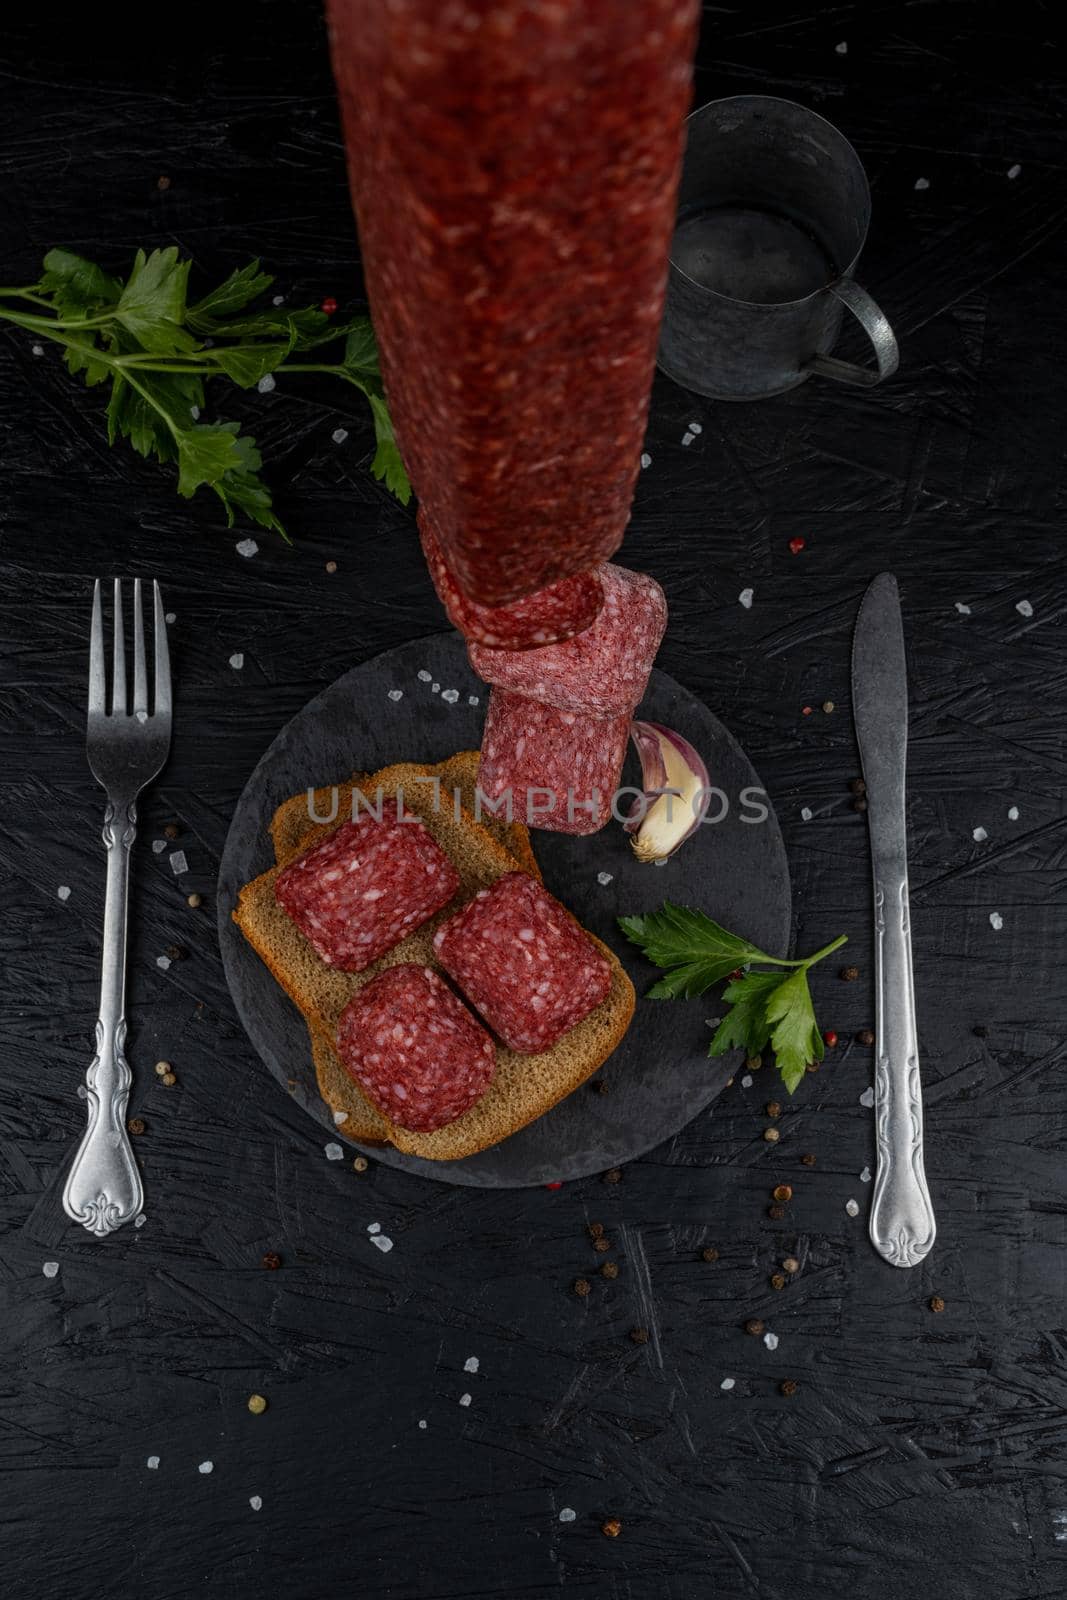 Smoked appetizing sausages on a wooden board on a black background. On a black background, sea salt